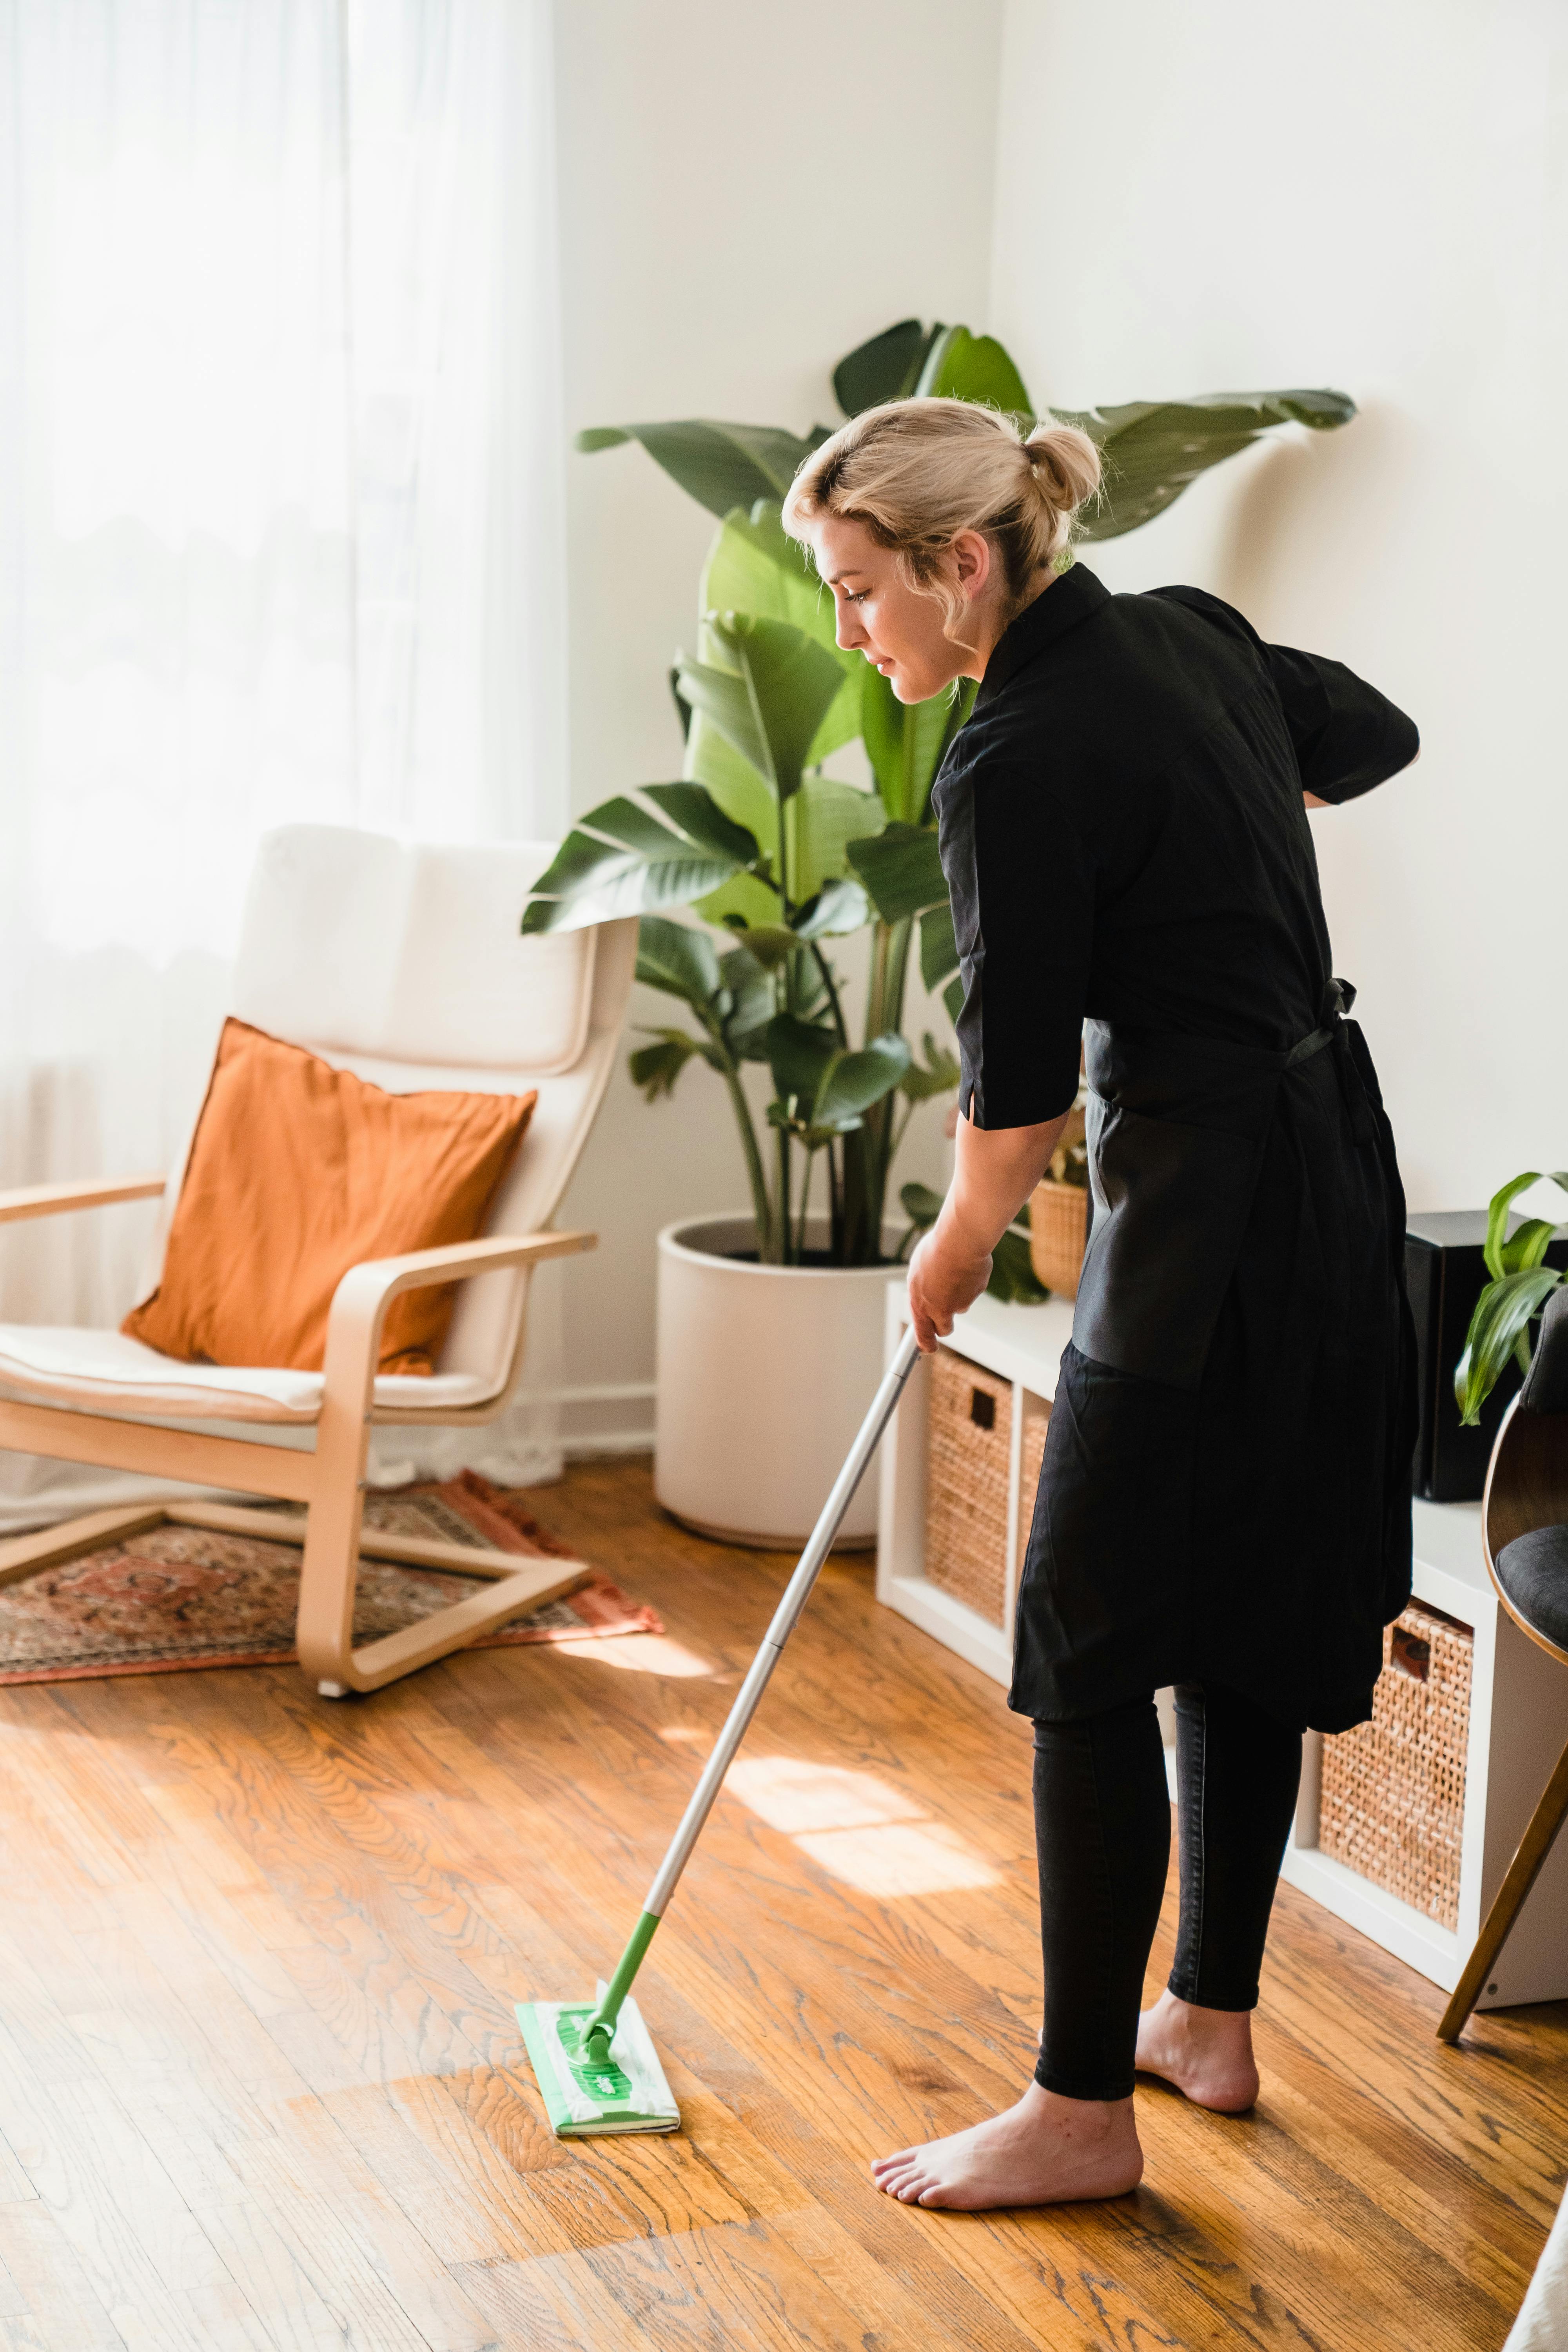 A woman cleaning the house | Source: Pexels